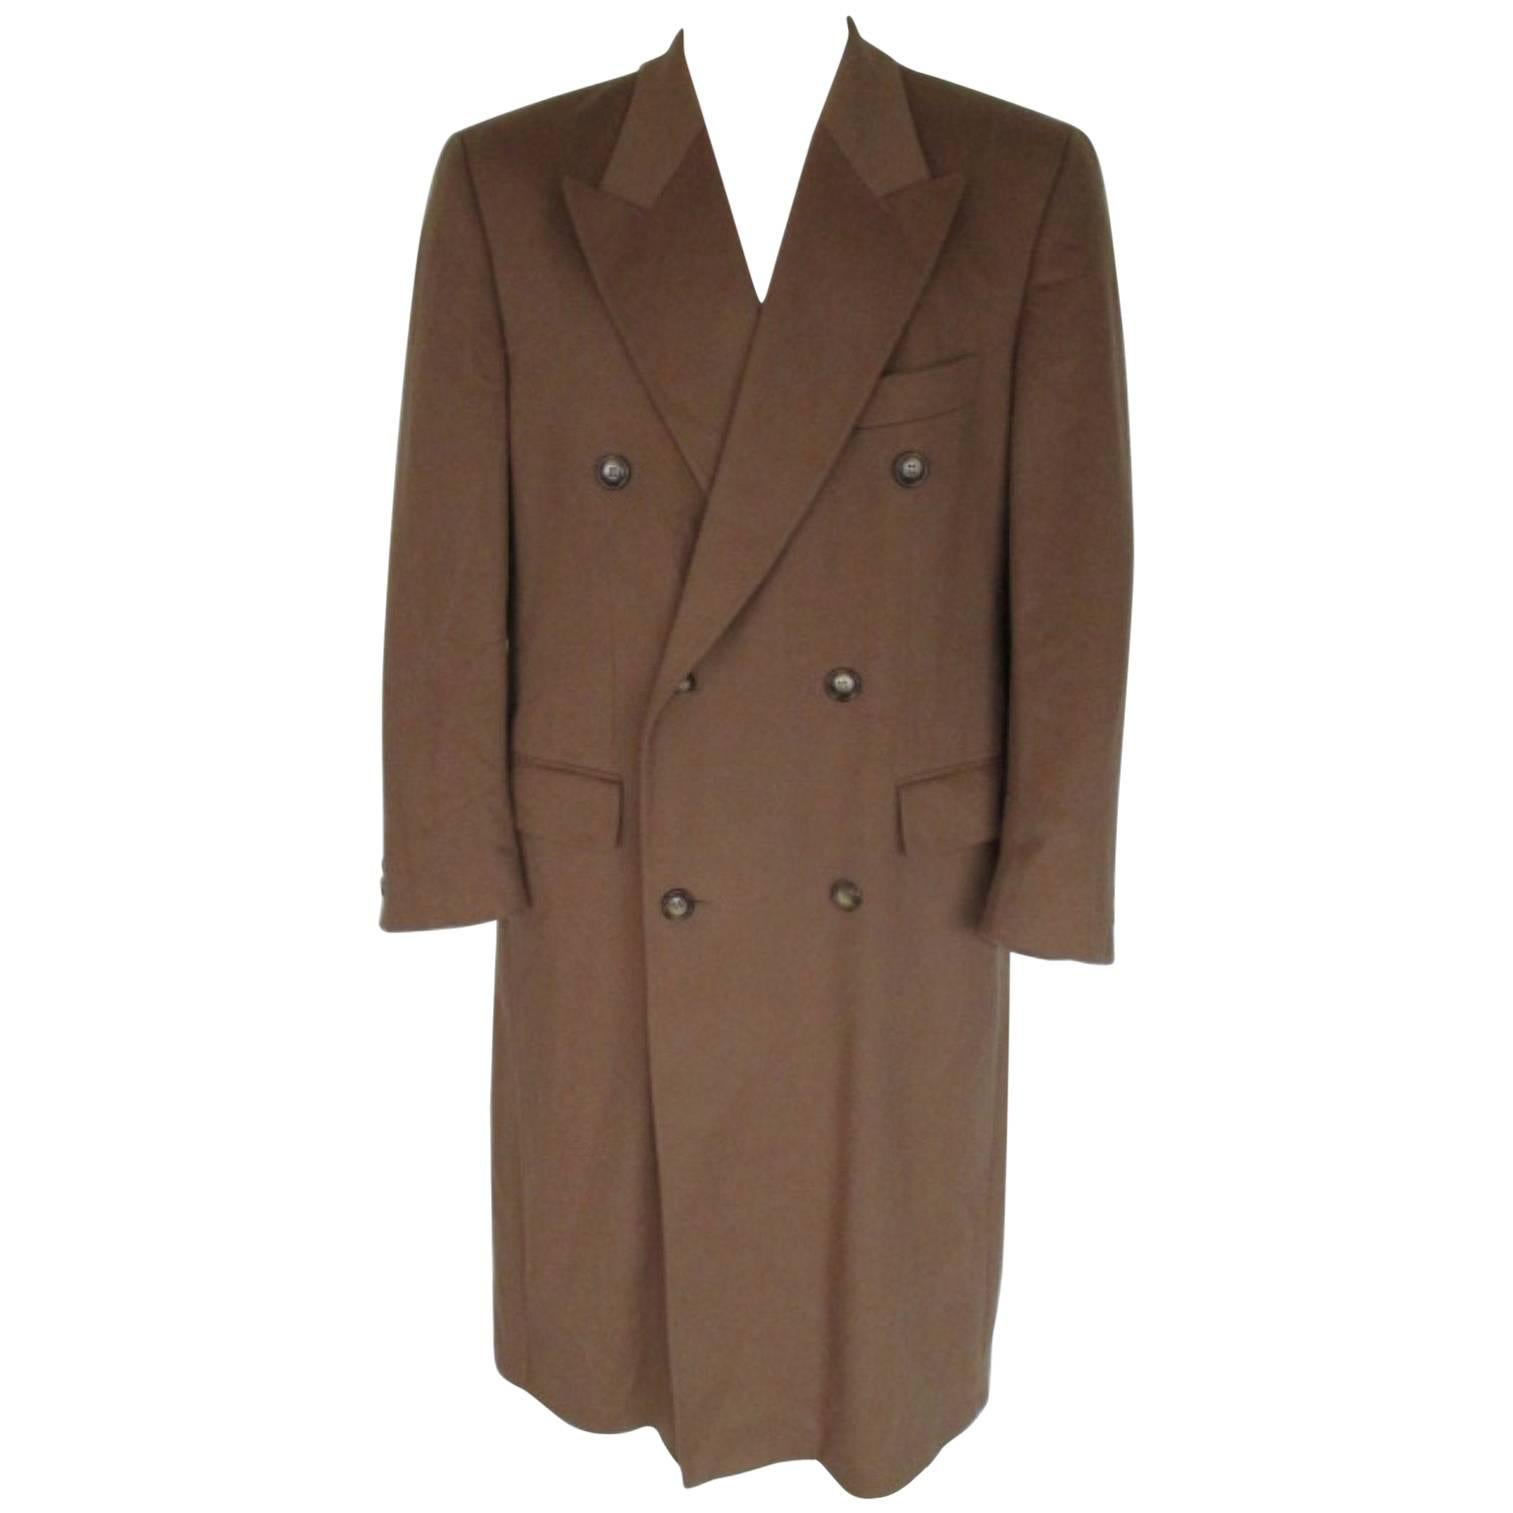 What is the difference between an overcoat and a coat?